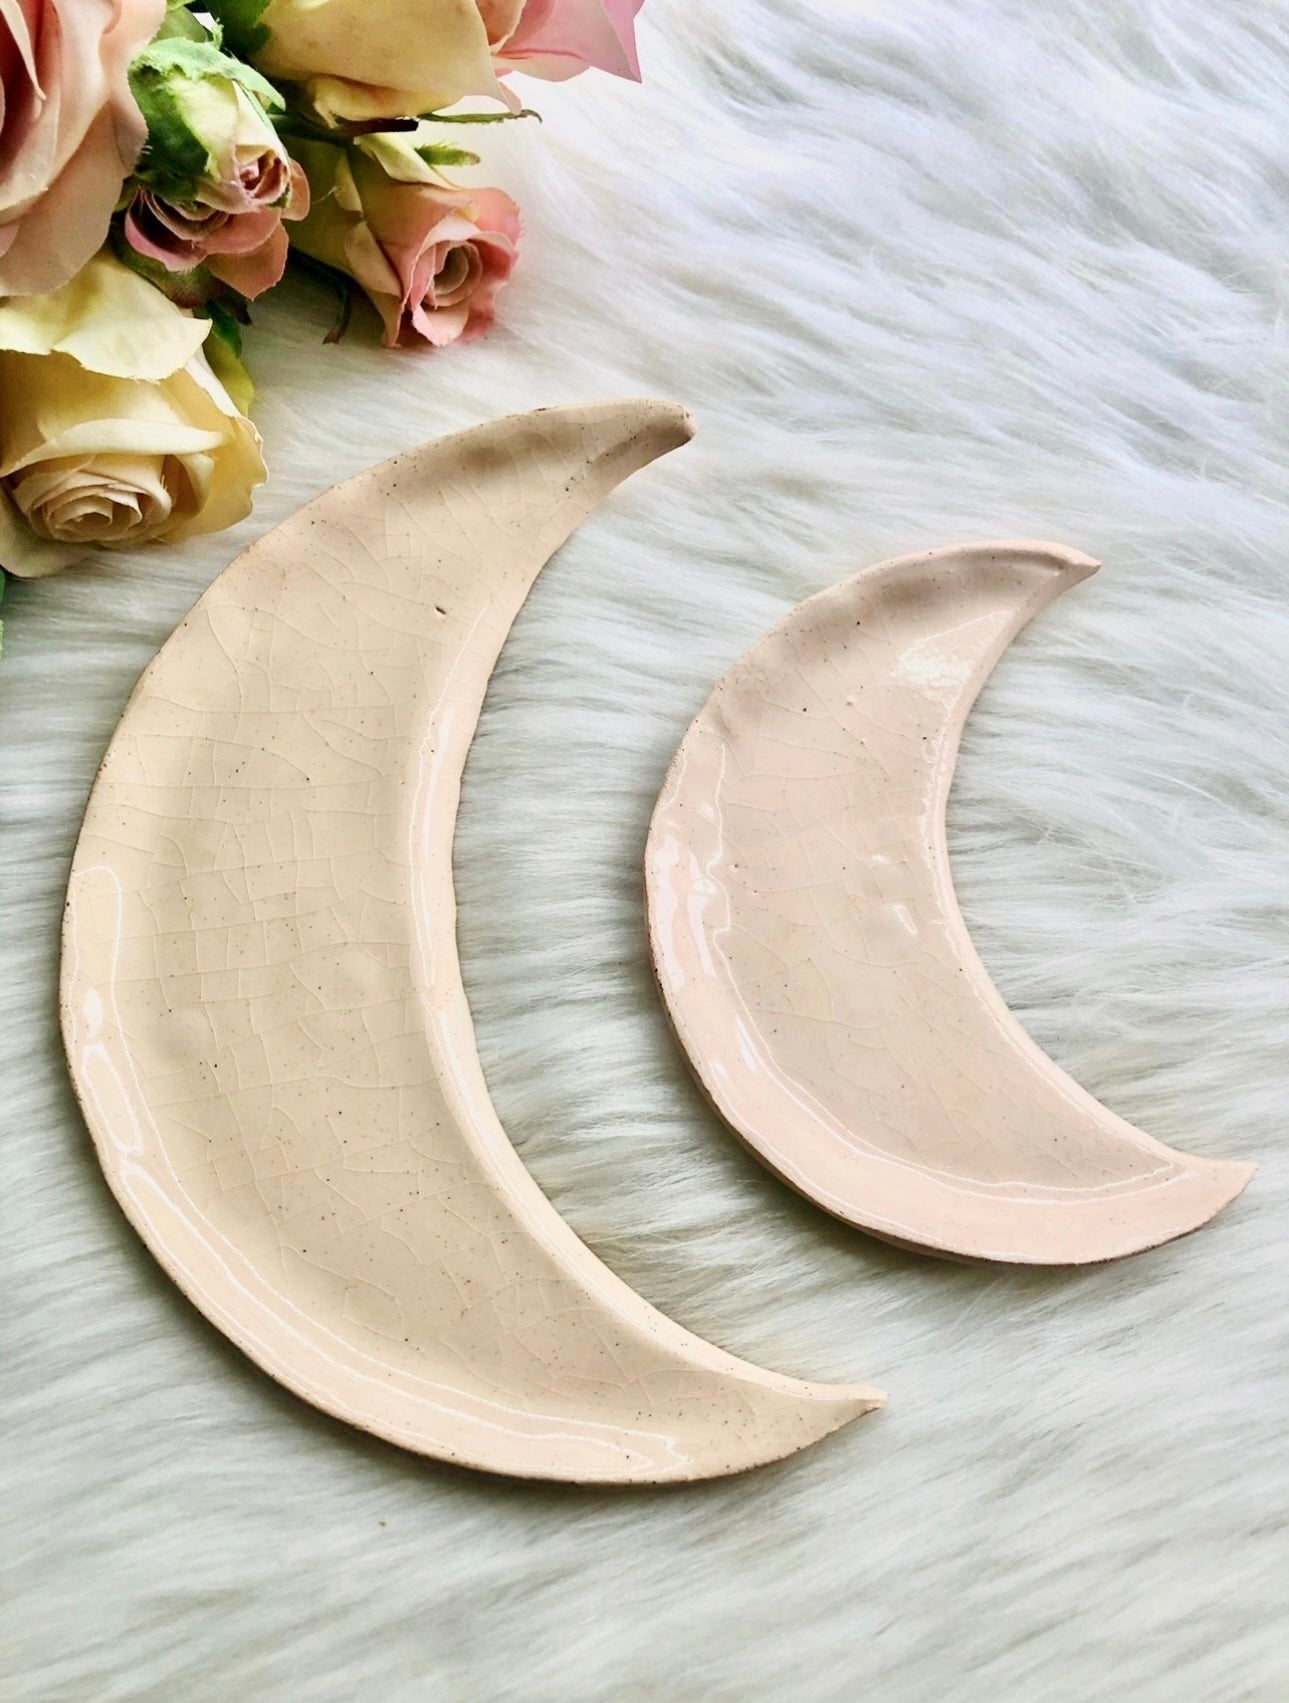 Gorgeous Large 16cm Handmade Ceramic Moon Plate By Florence and Folk